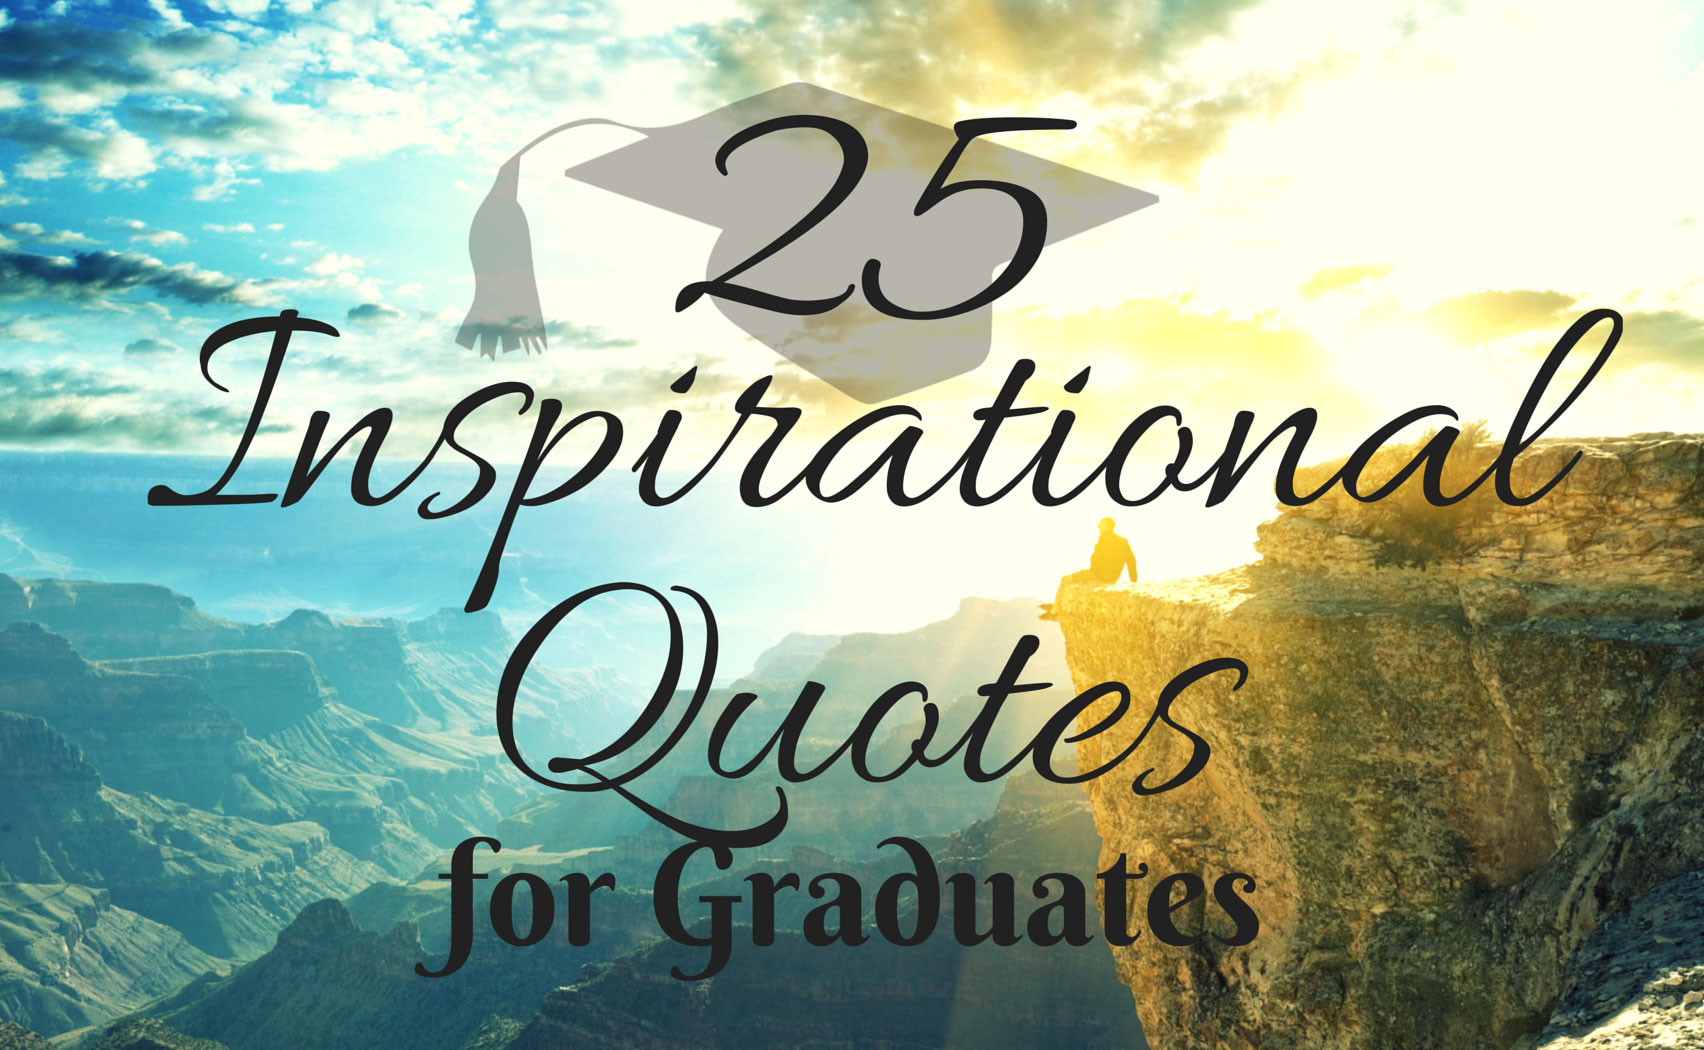 Inspirational Quotes For College Graduation
 Graduation Quotes For Elementary Students QuotesGram